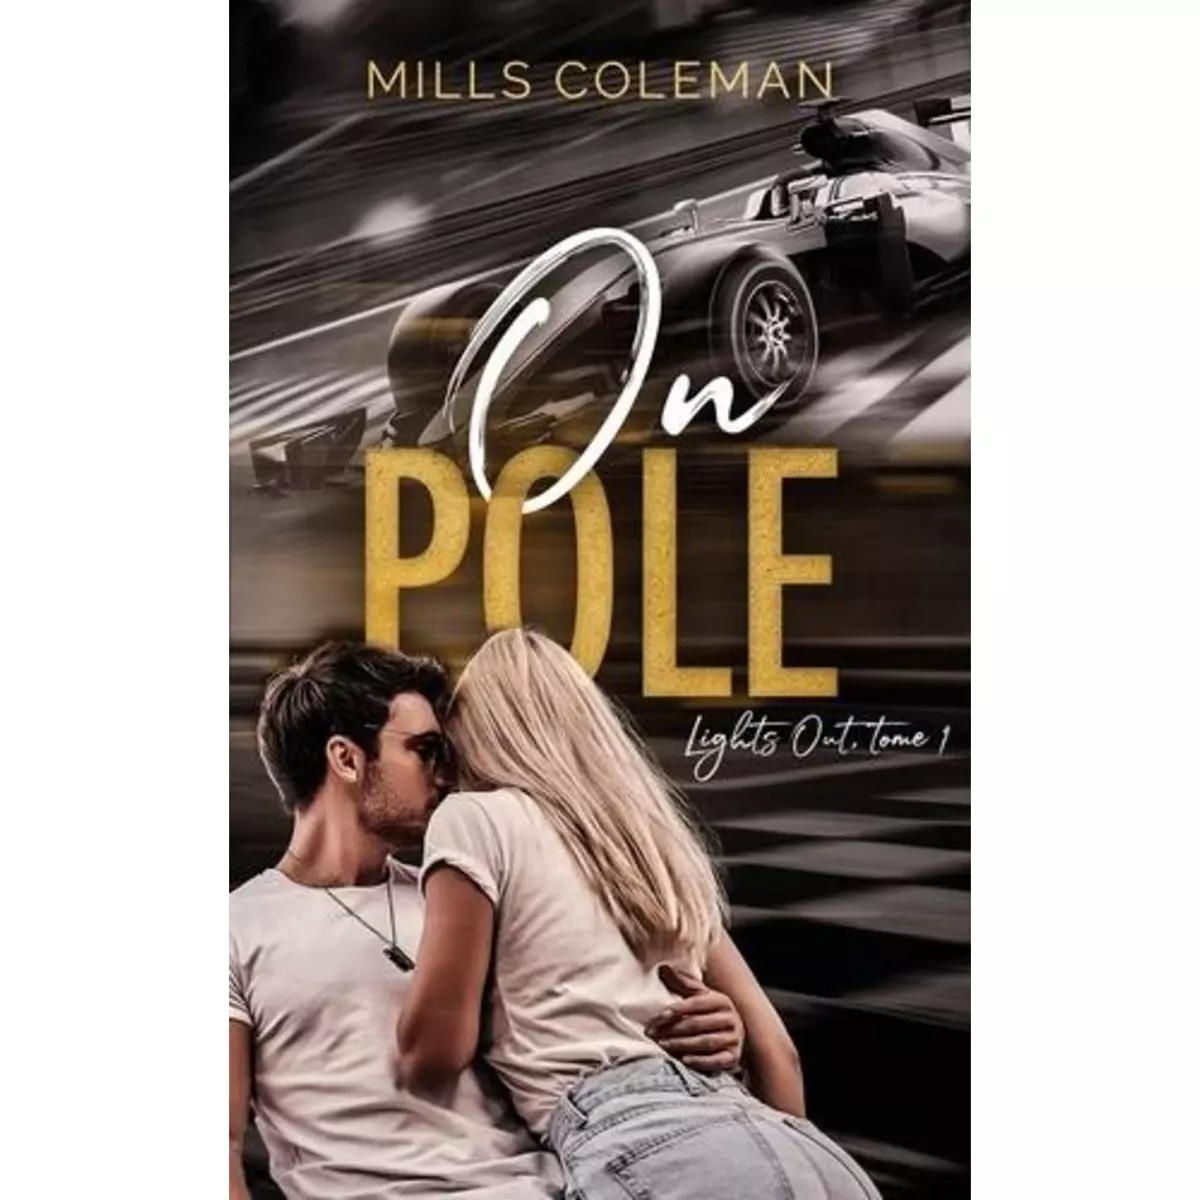  LIGHTS OUT TOME 1 : ON POLE, Coleman Mills